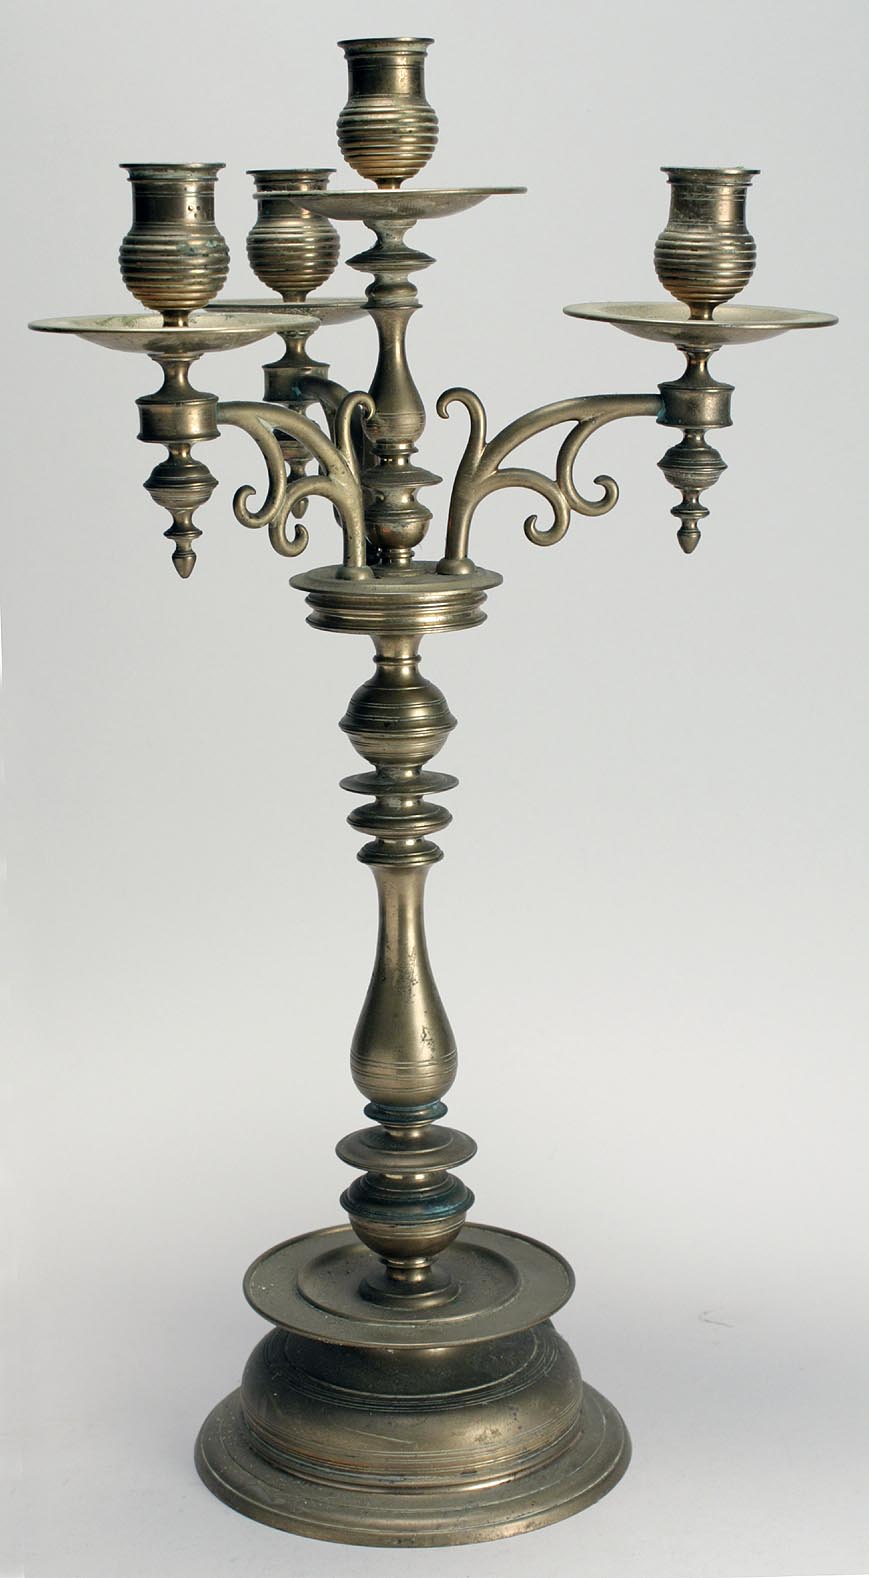 BRASS FOUR-SOCLE CANDELABRUMHeight